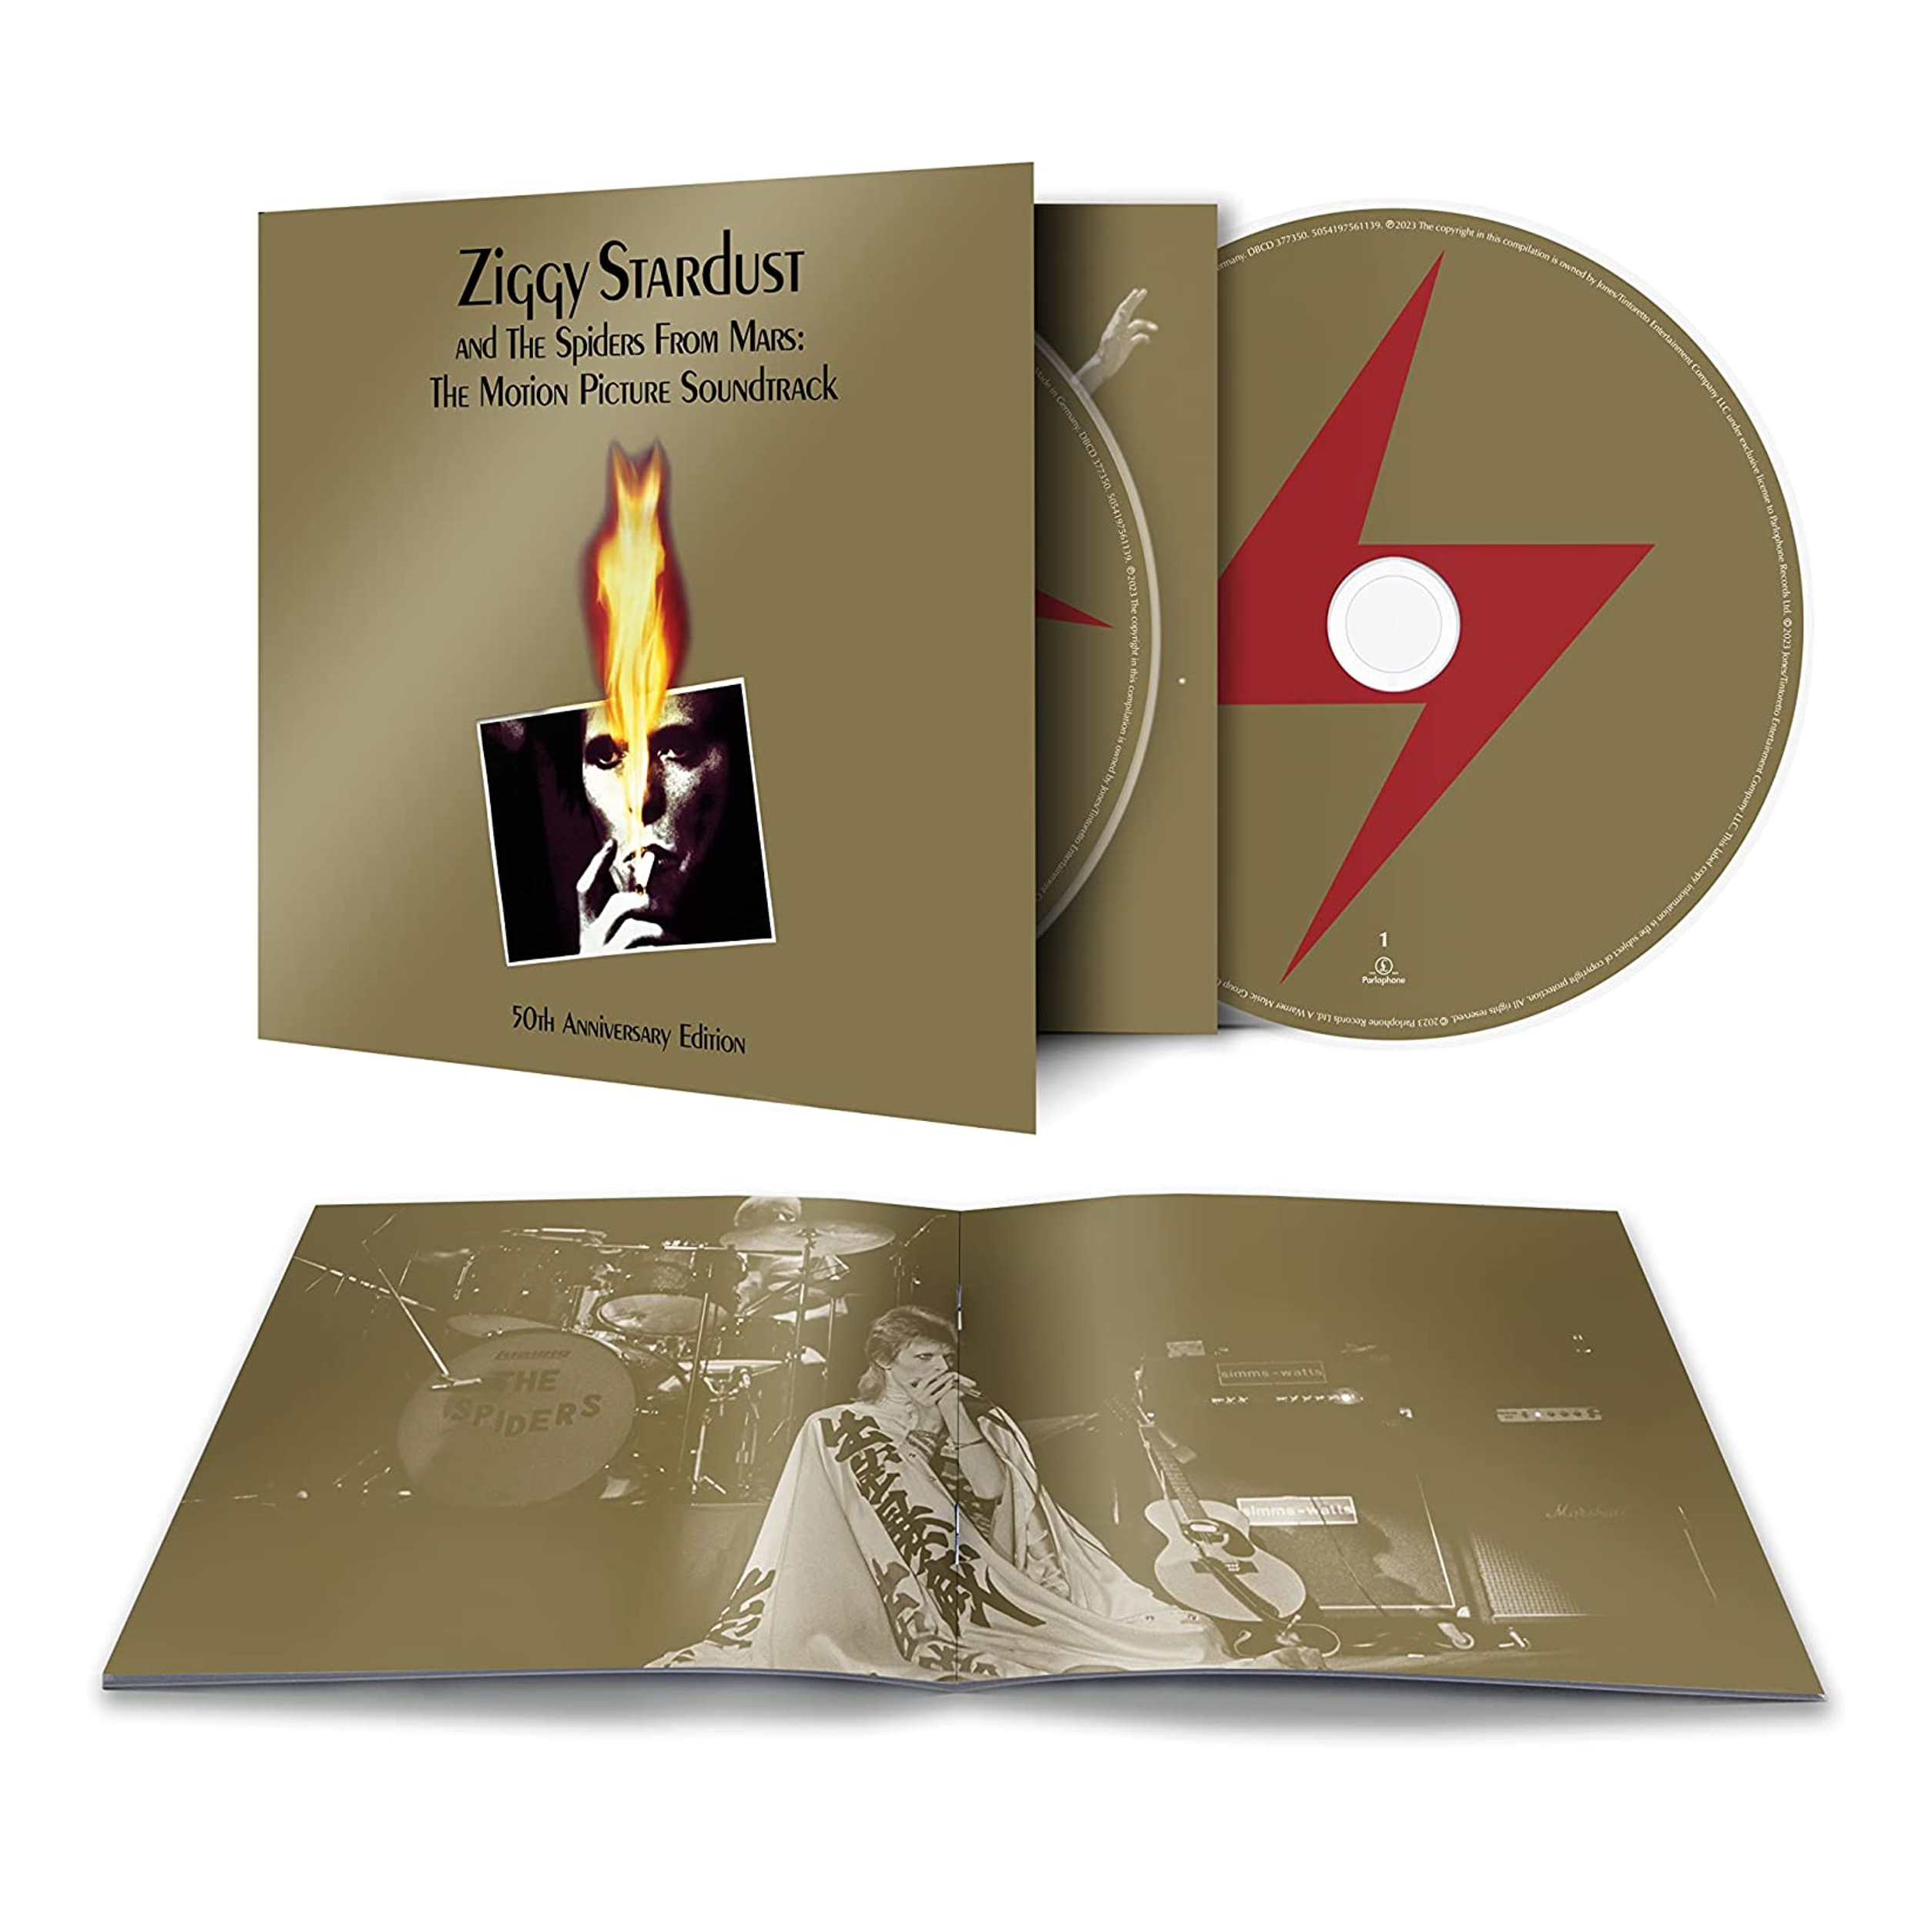 Ziggy Stardust and The Spiders From Mars: The Motion Picture Soundtrack (Edizione 50° Anniversario - 2CD)